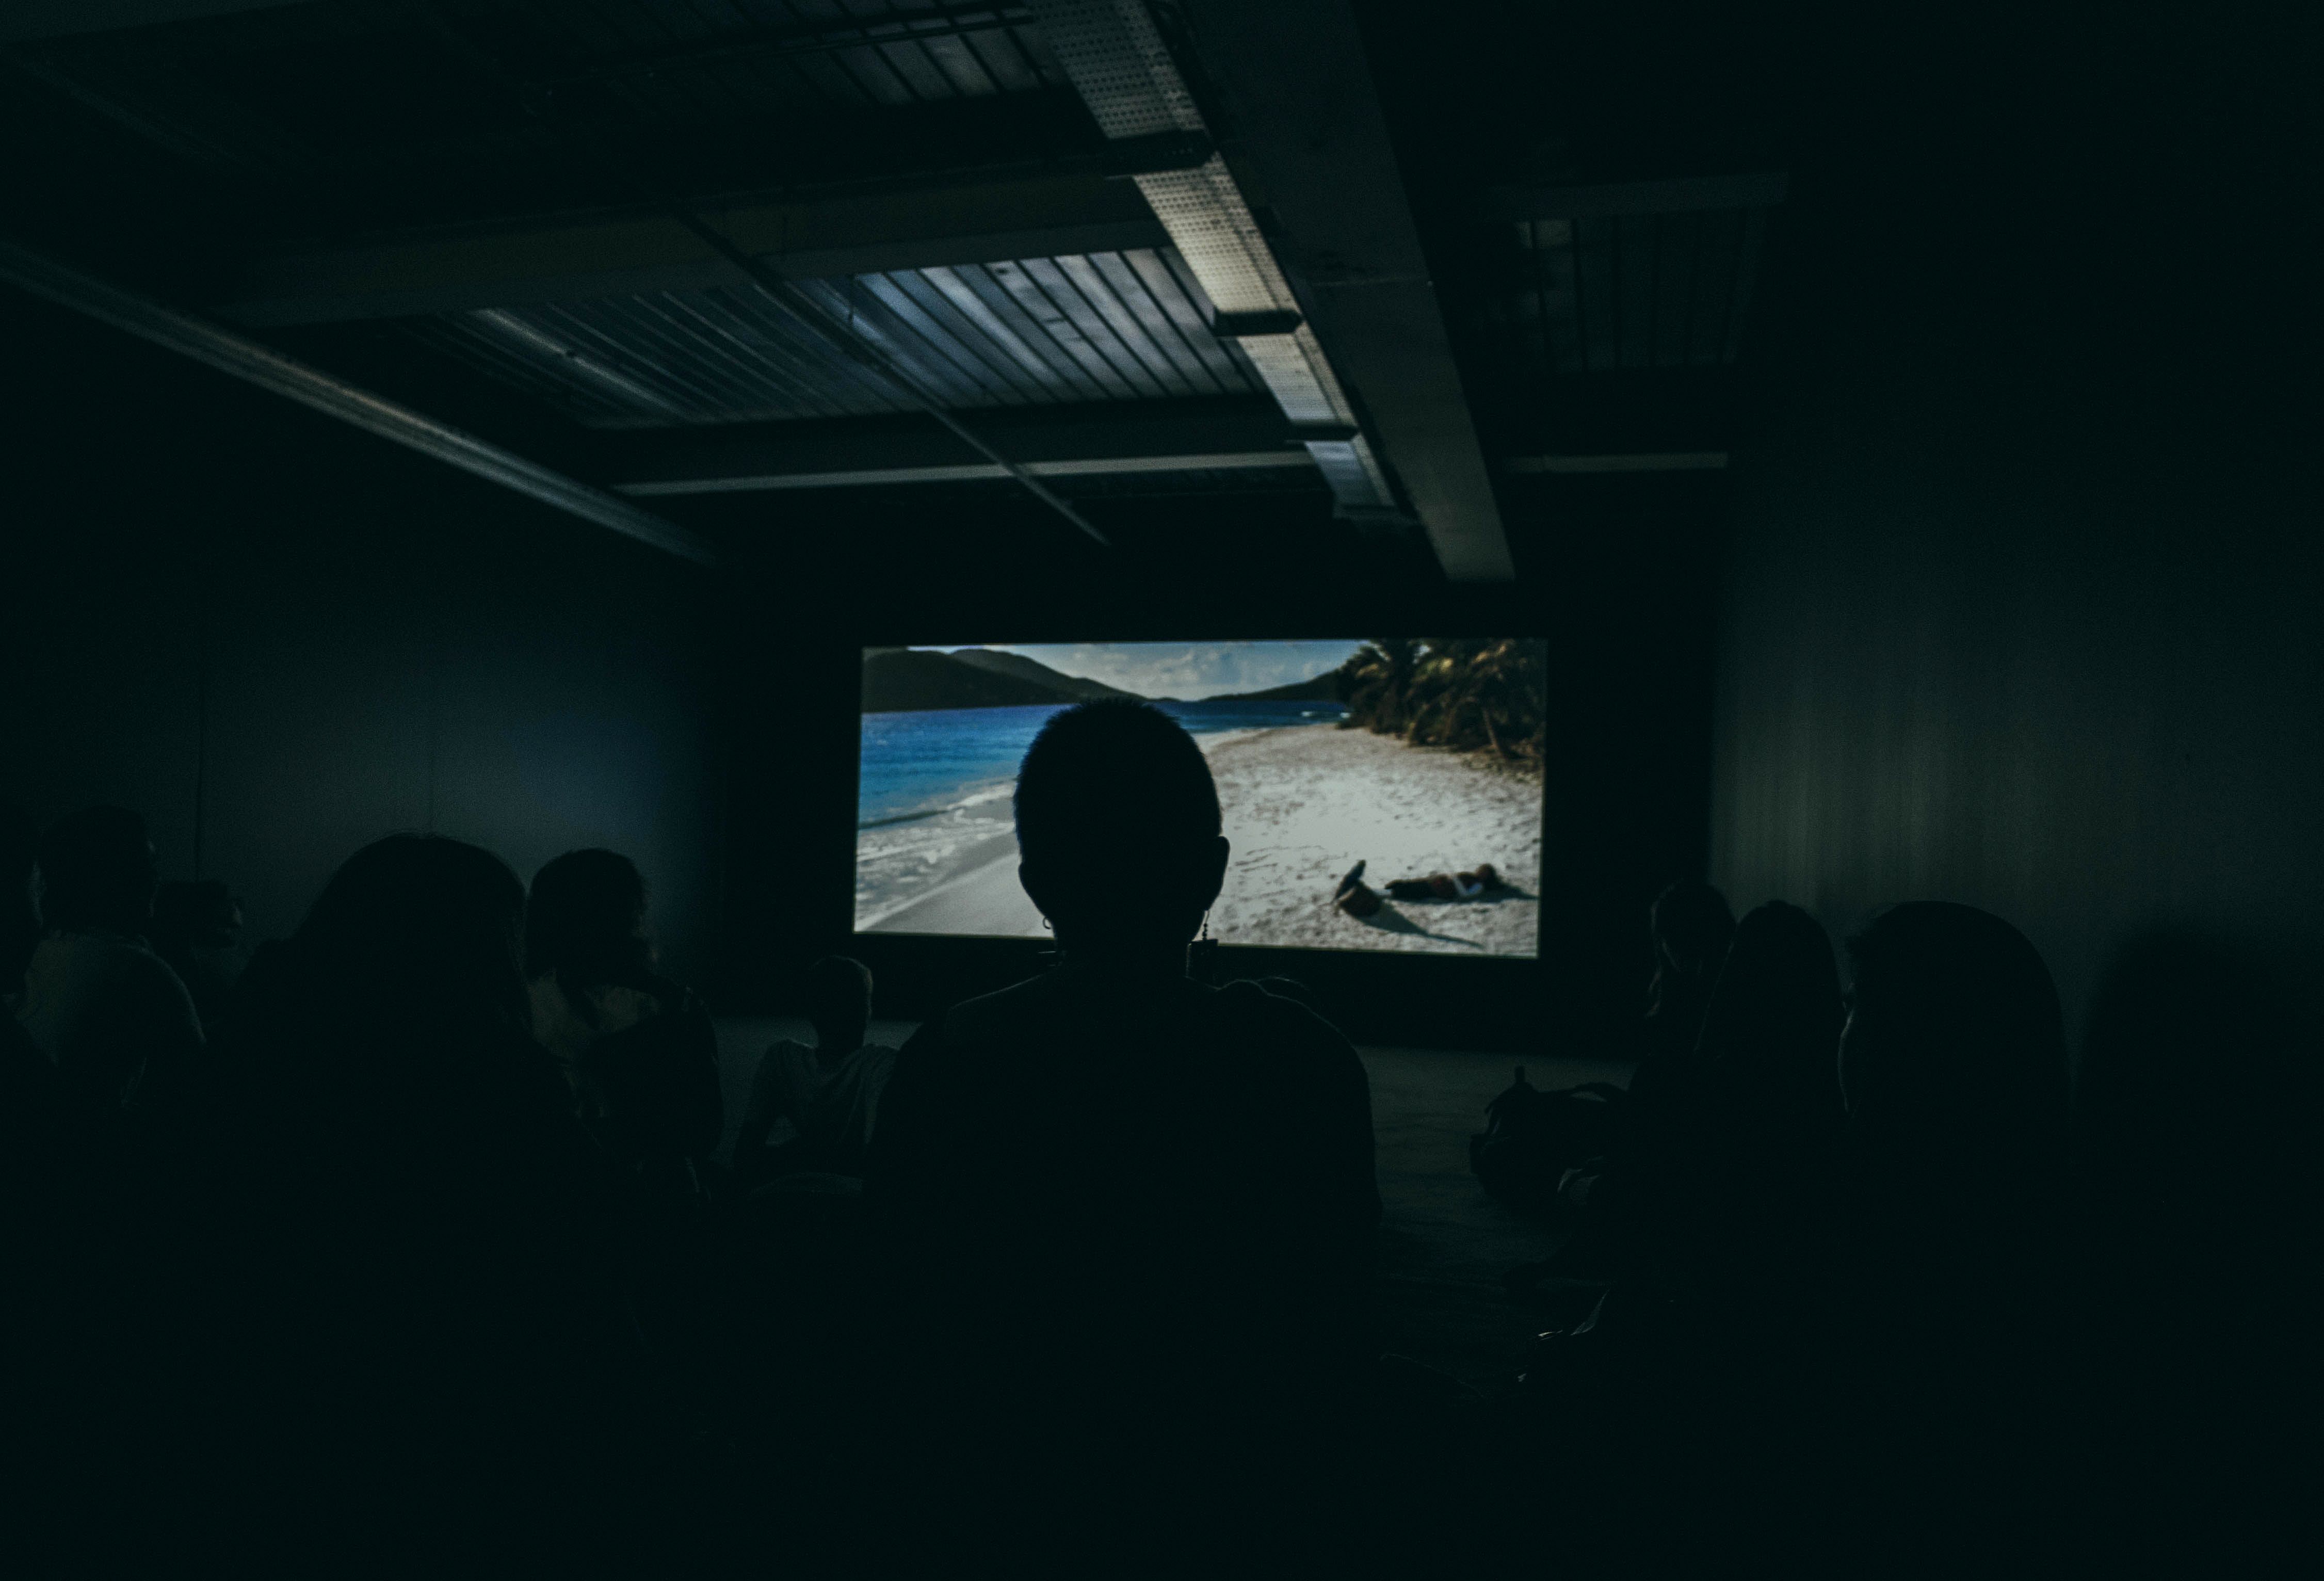 A person watching a movie with a smart projector.